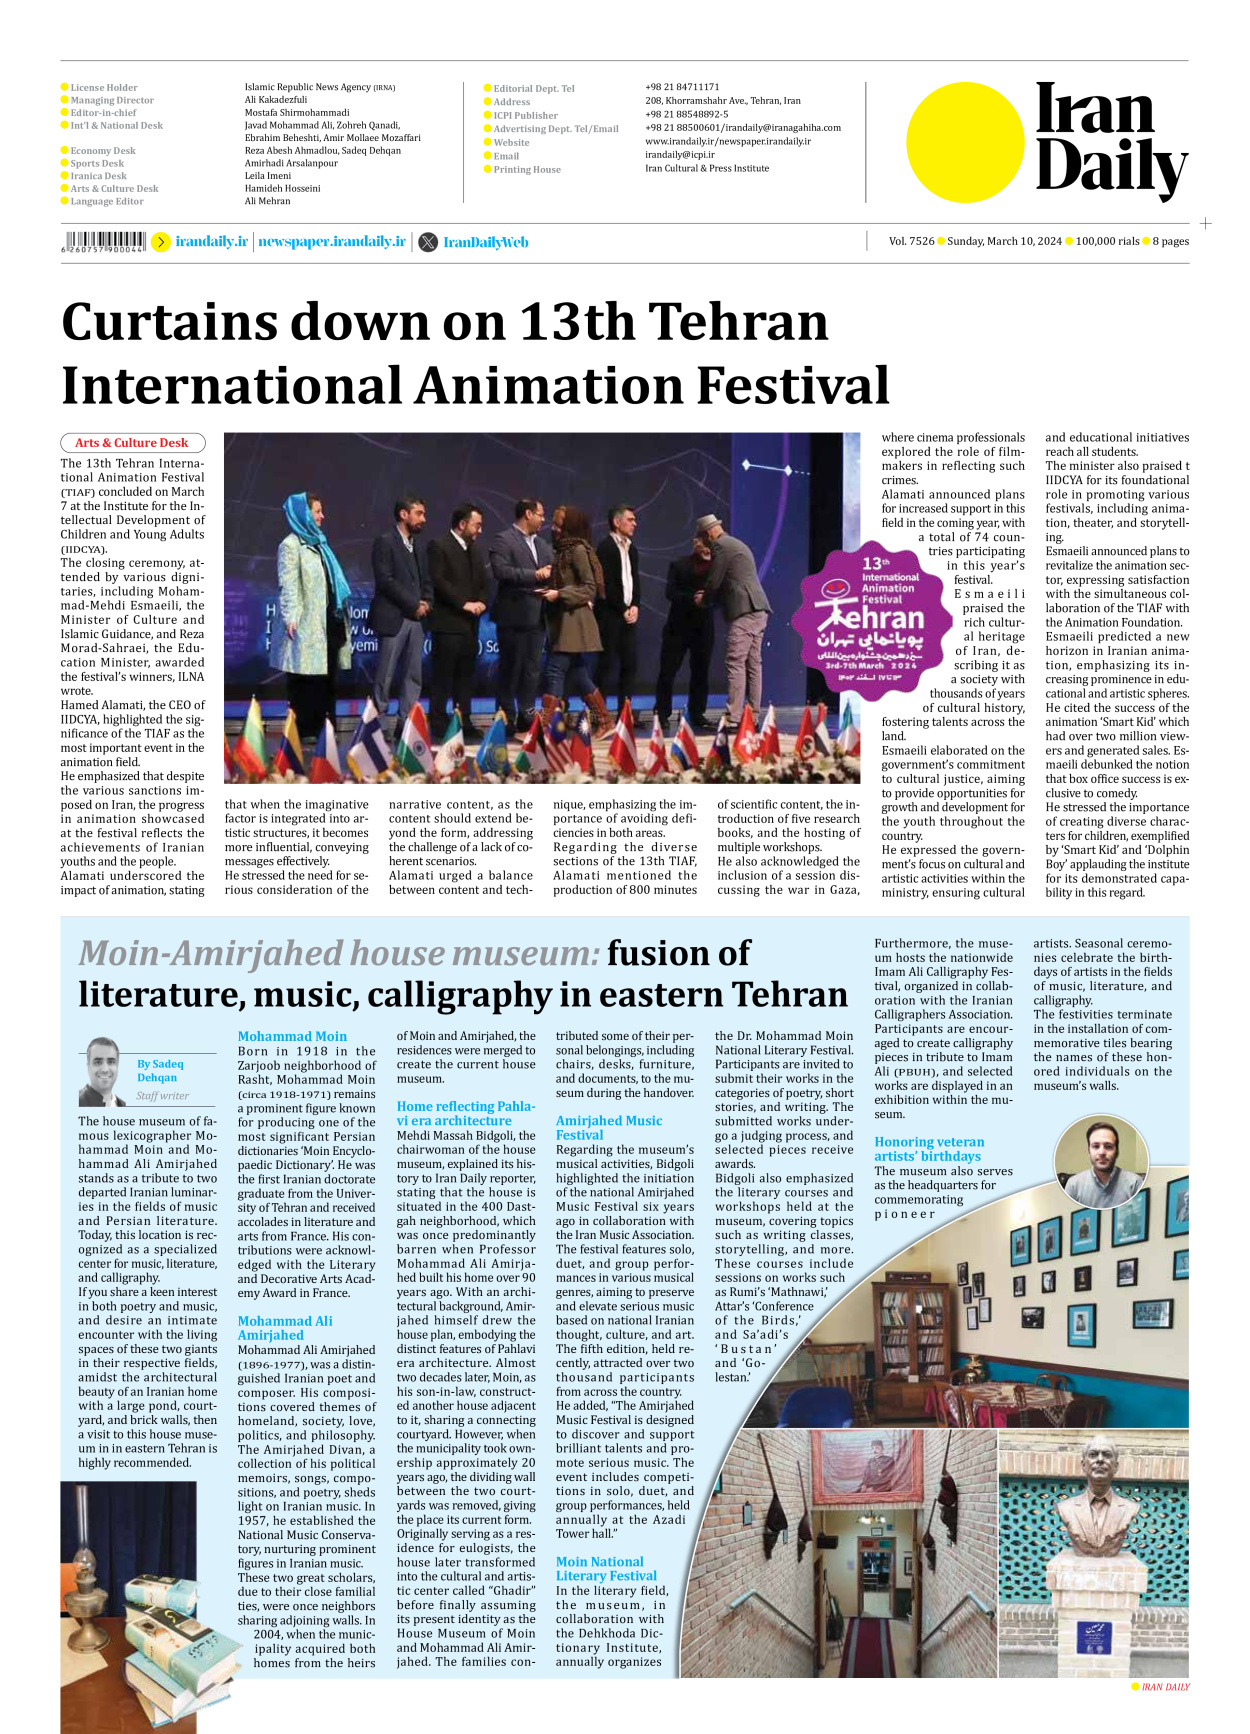 Iran Daily - Number Seven Thousand Five Hundred and Twenty Six - 10 March 2024 - Page 8